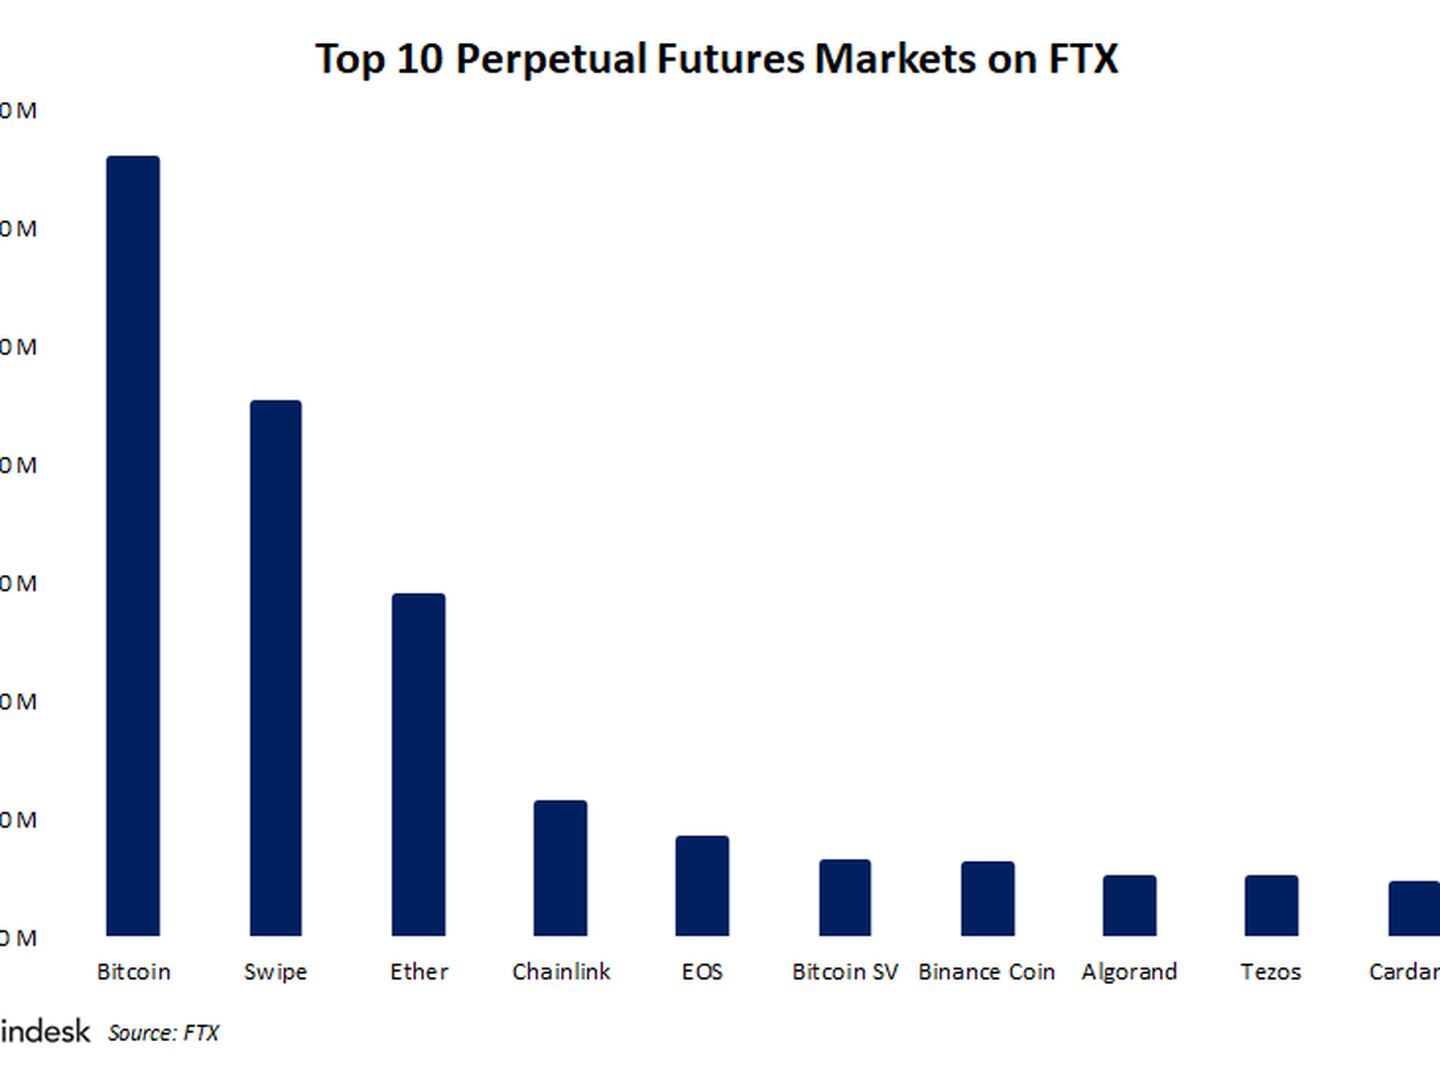 Top FTX perpetual futures markets ranked by 24-hour trading volume